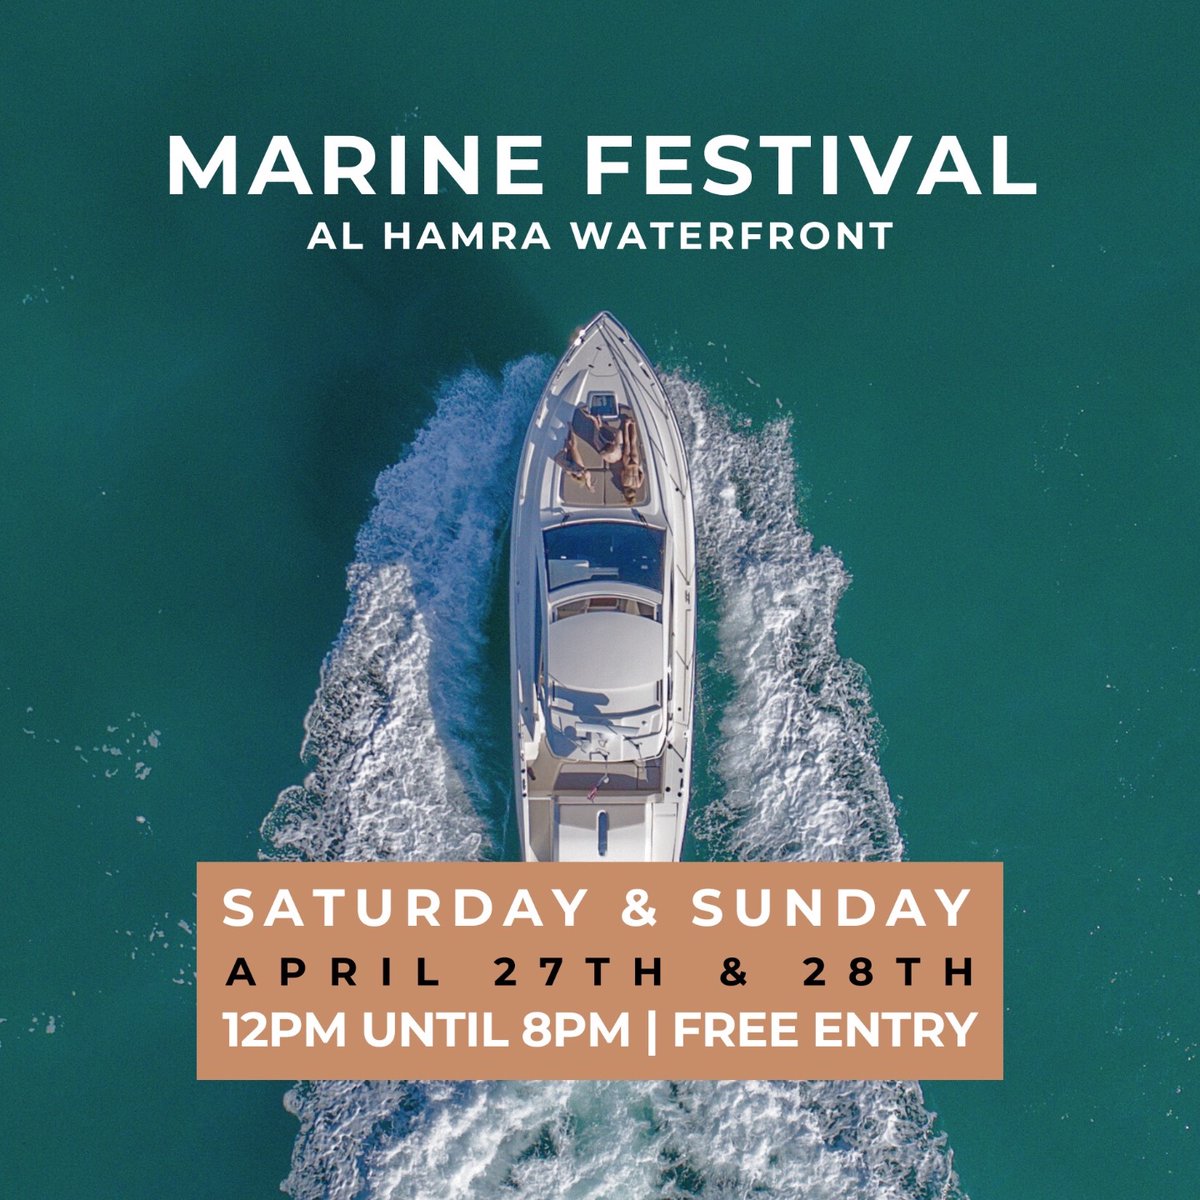 Tomorrow marks the inaugural Marine Festival hosted by the Royal Yacht Club of Ras Al Khaimah in the United Arab Emirates. 

We are excited to be partners of this inaugural event!

🔗 Learn more: yatco.com/royal-yacht-cl…